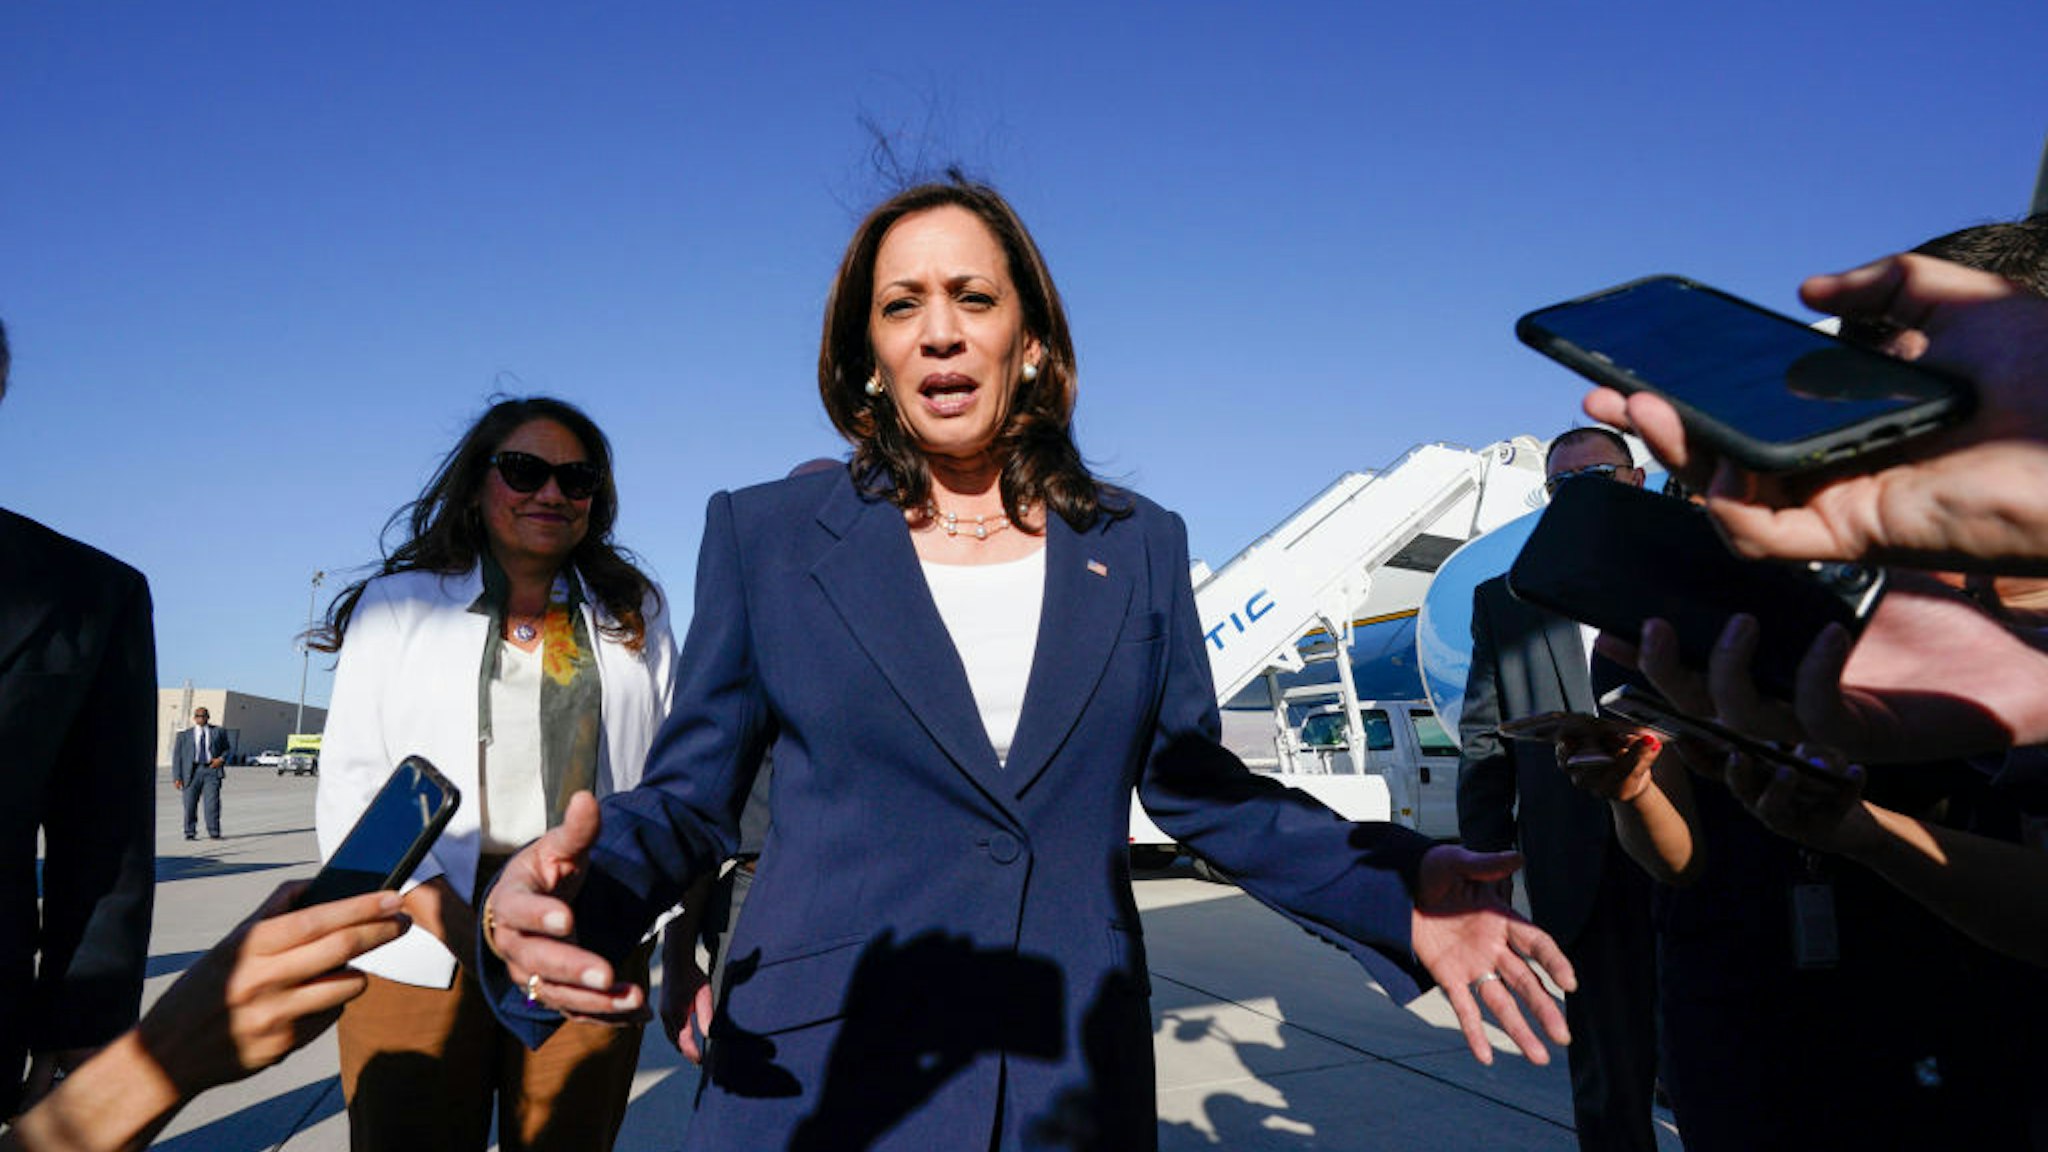 U.S. Vice President Kamala Harris speaks to members of the media as she arrives at the El Paso International Airport in El Paso, Texas, U.S., on Friday, June 25, 2021. The vice president's visit to the southern border comes after months of denunciations from Republicans, as well as frustration from some Democrats, for not having gone to the border after being chosen to address the root causes of migration from Central America to the U.S. Photographer: Yuri Gripas/Abaca/Bloomberg via Getty Images